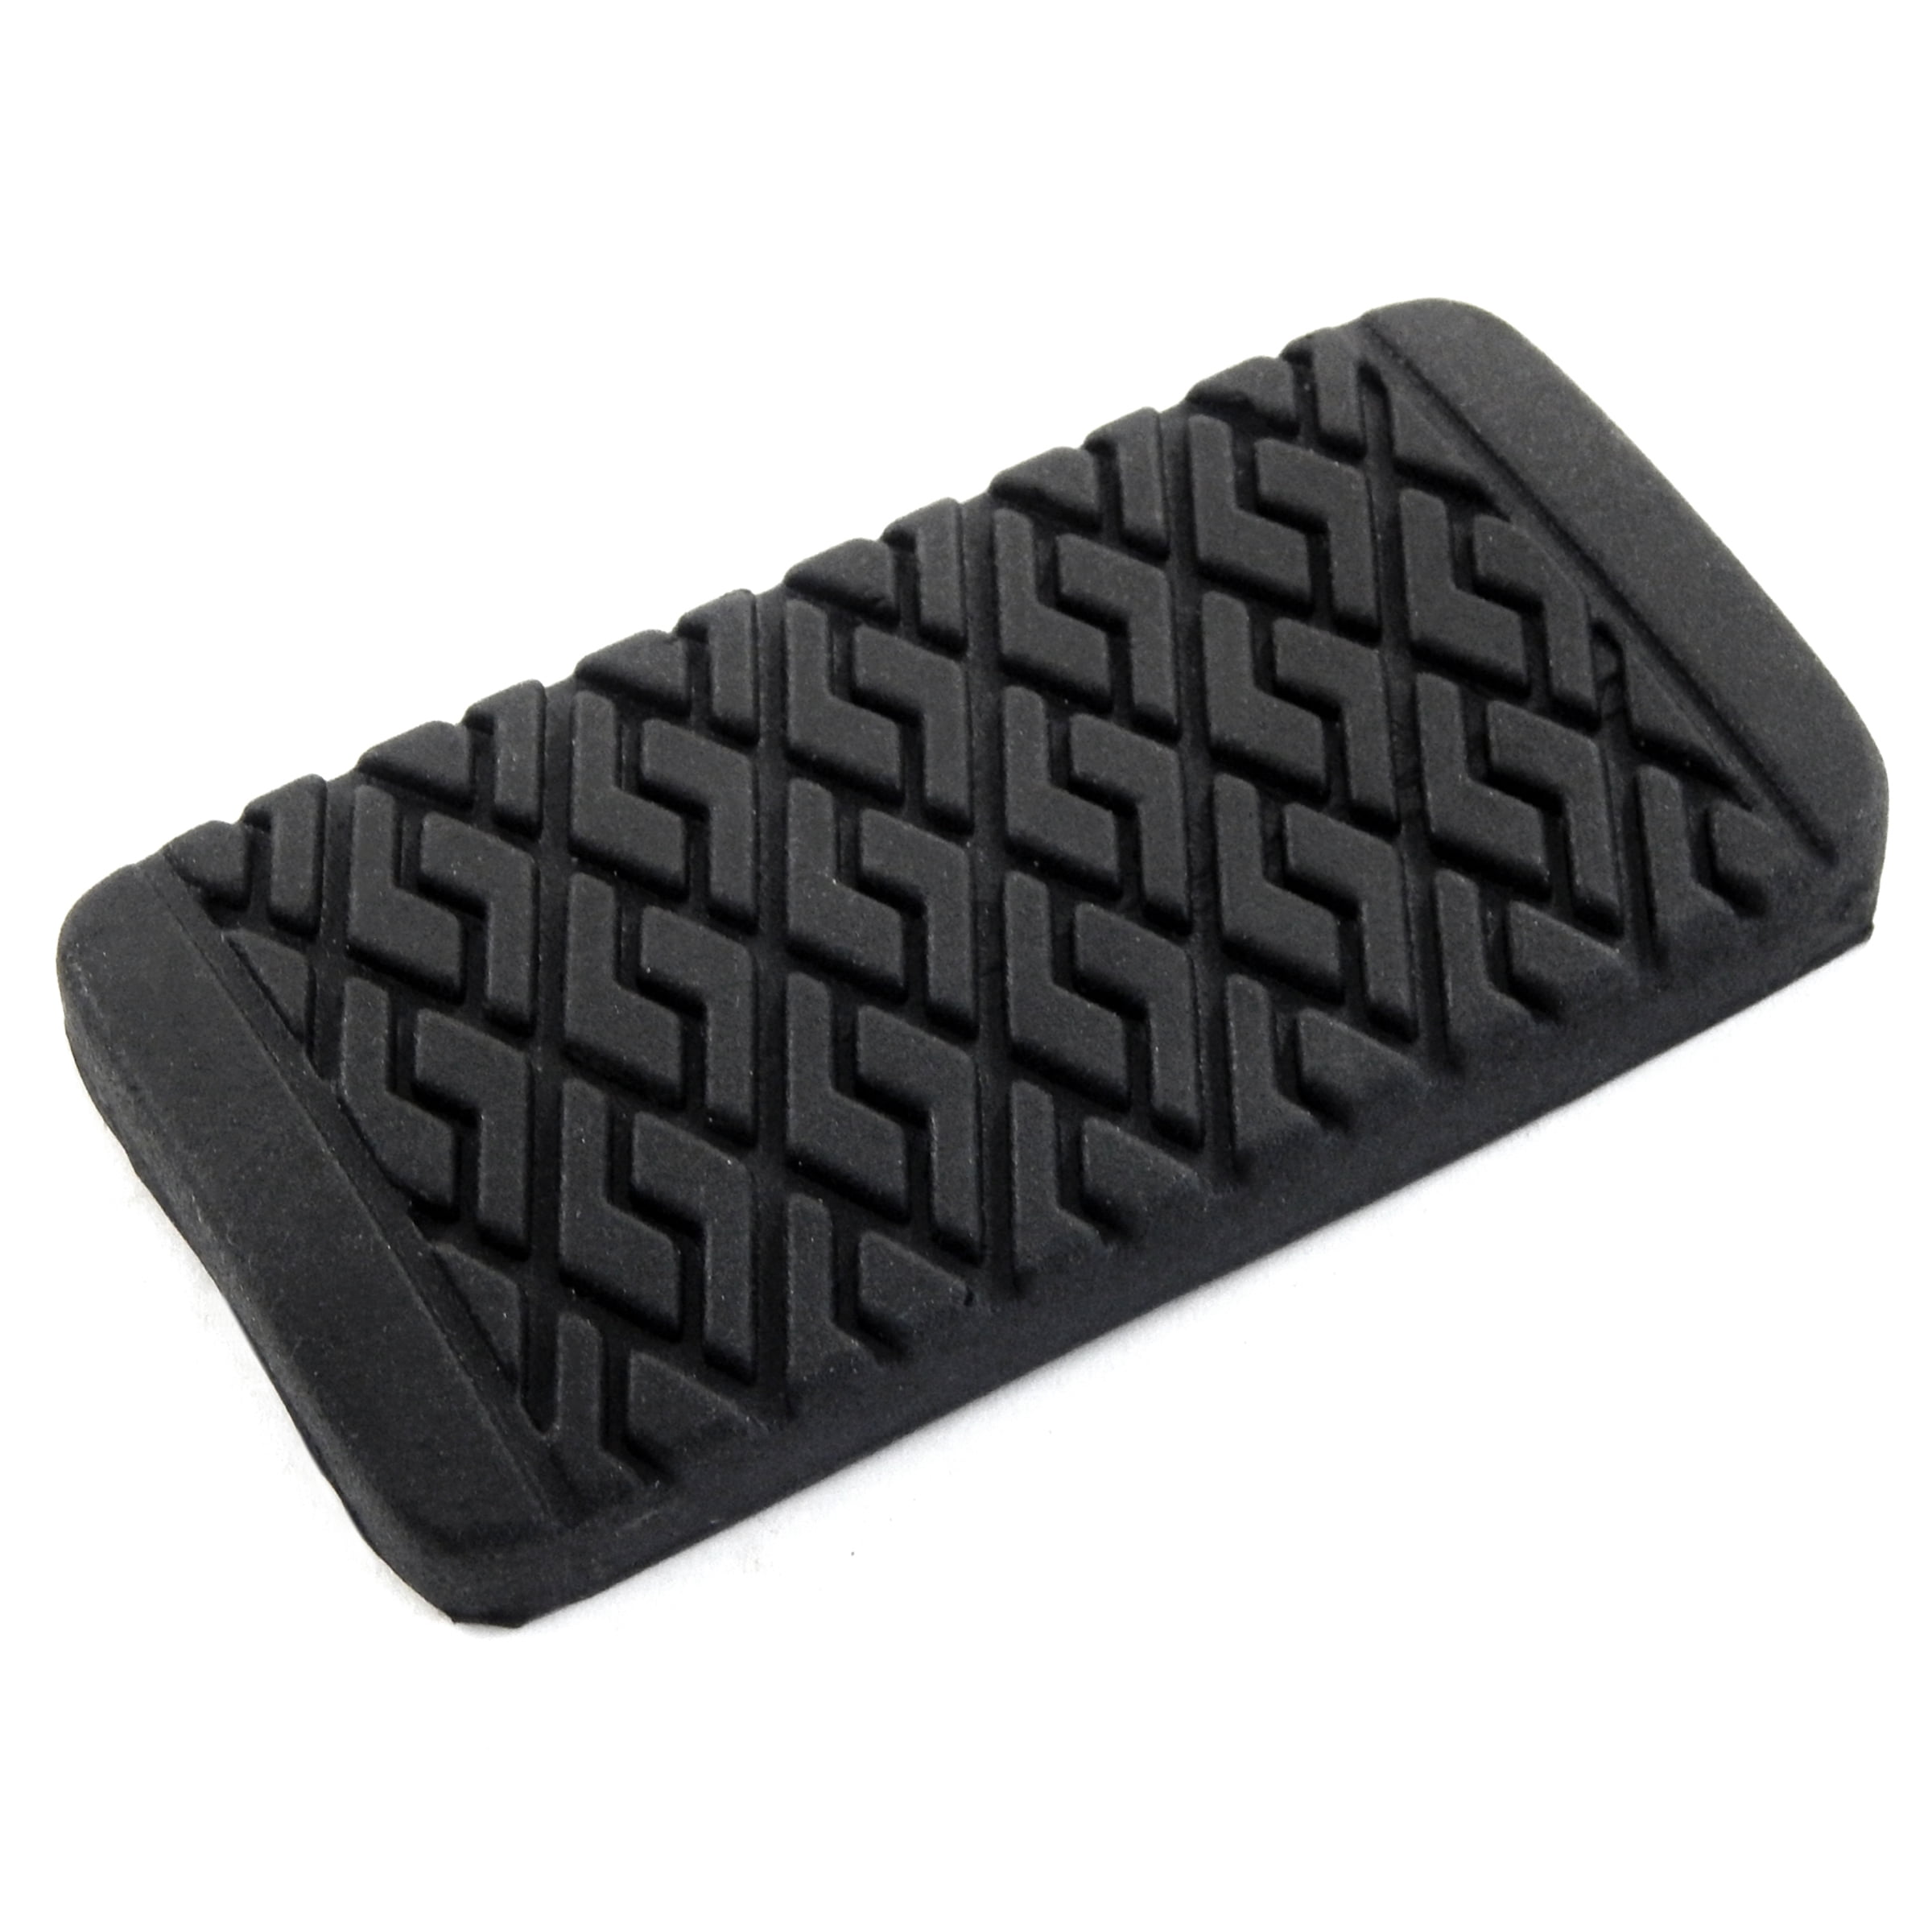 Red Hound Auto Replacement Brake Pedal Pad Compatible with Chevy Buick Century Tahoe & More Automatic Transmission